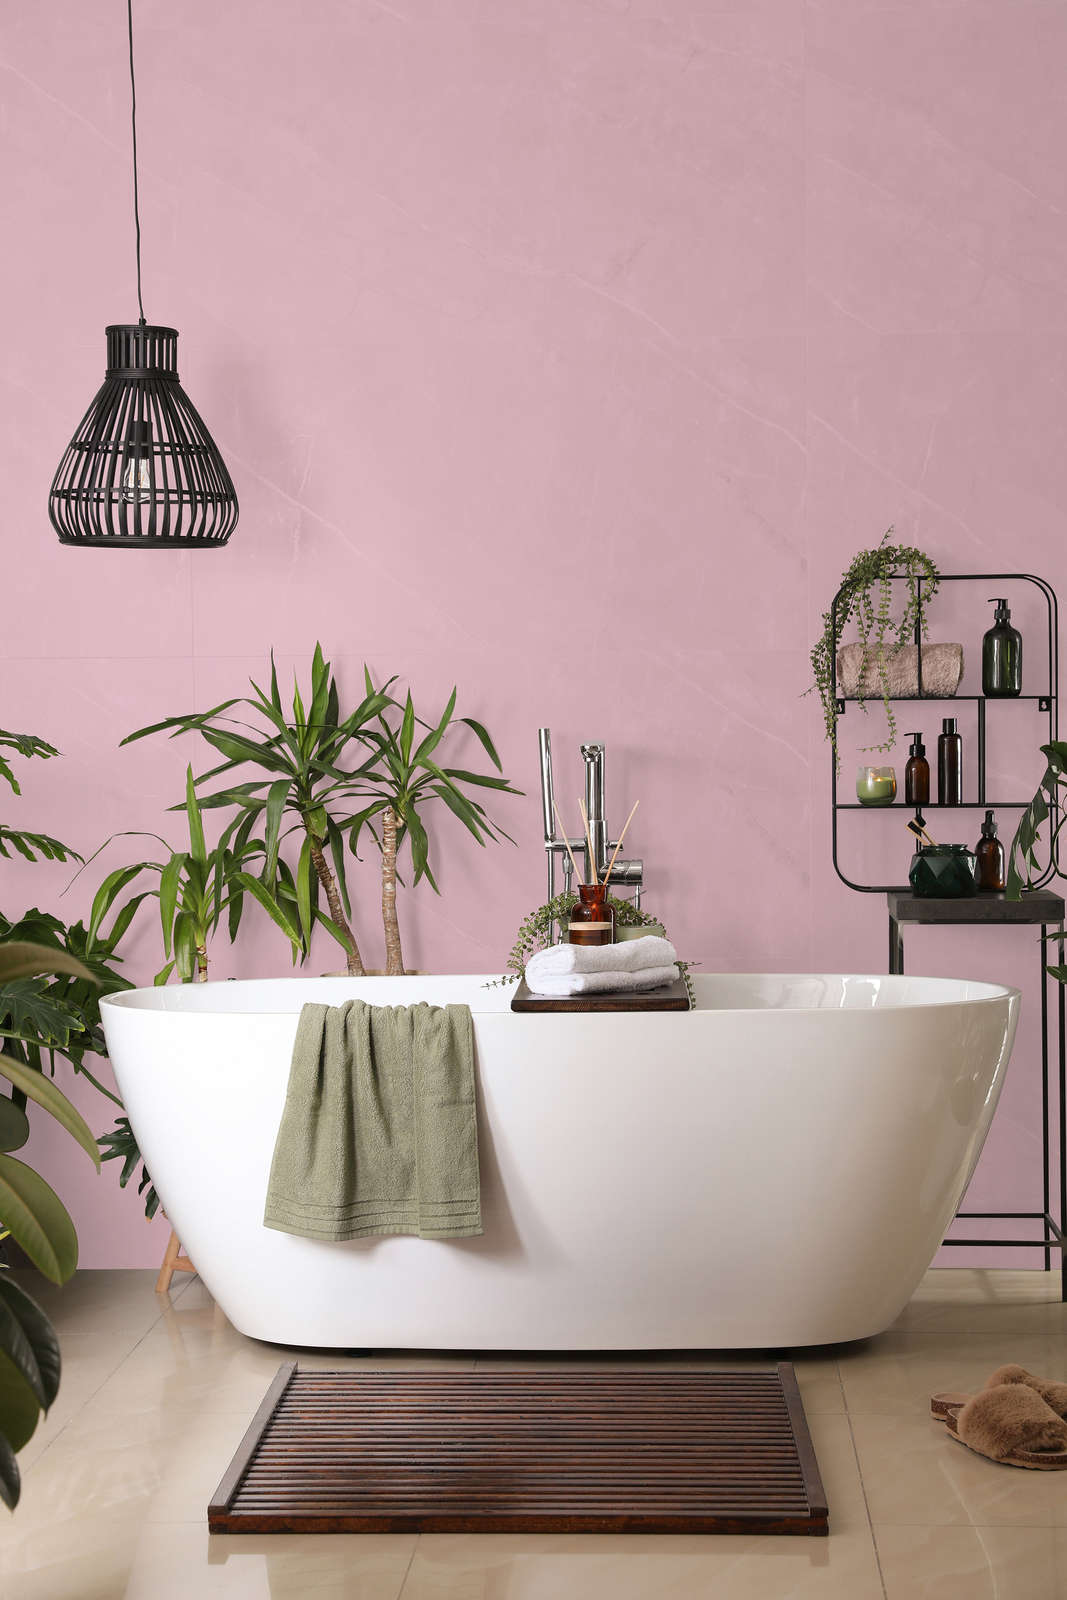             Premium Wall Paint serene pink »Beautiful Berry« NW209 – 1 litre
        